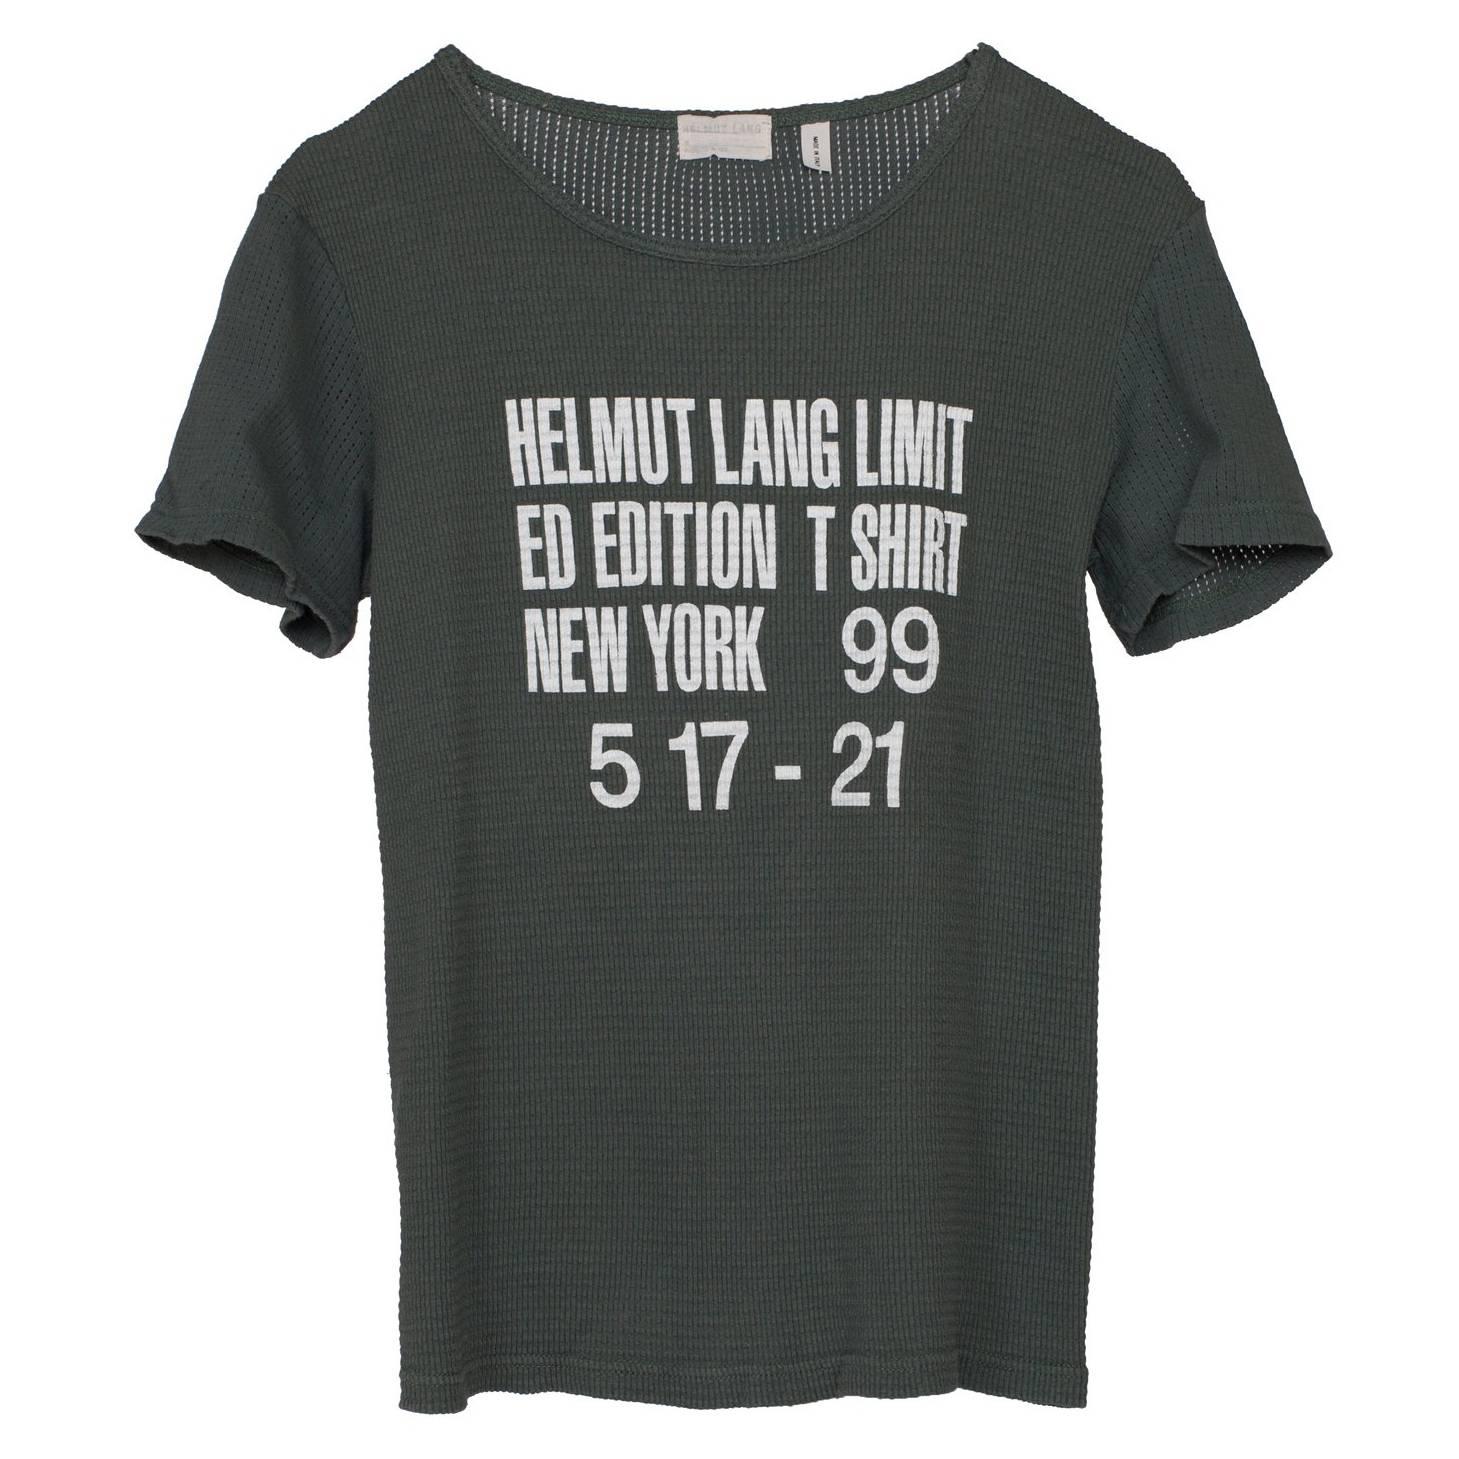 Helmut Lang Limited Edition T shirt 1999 For Sale